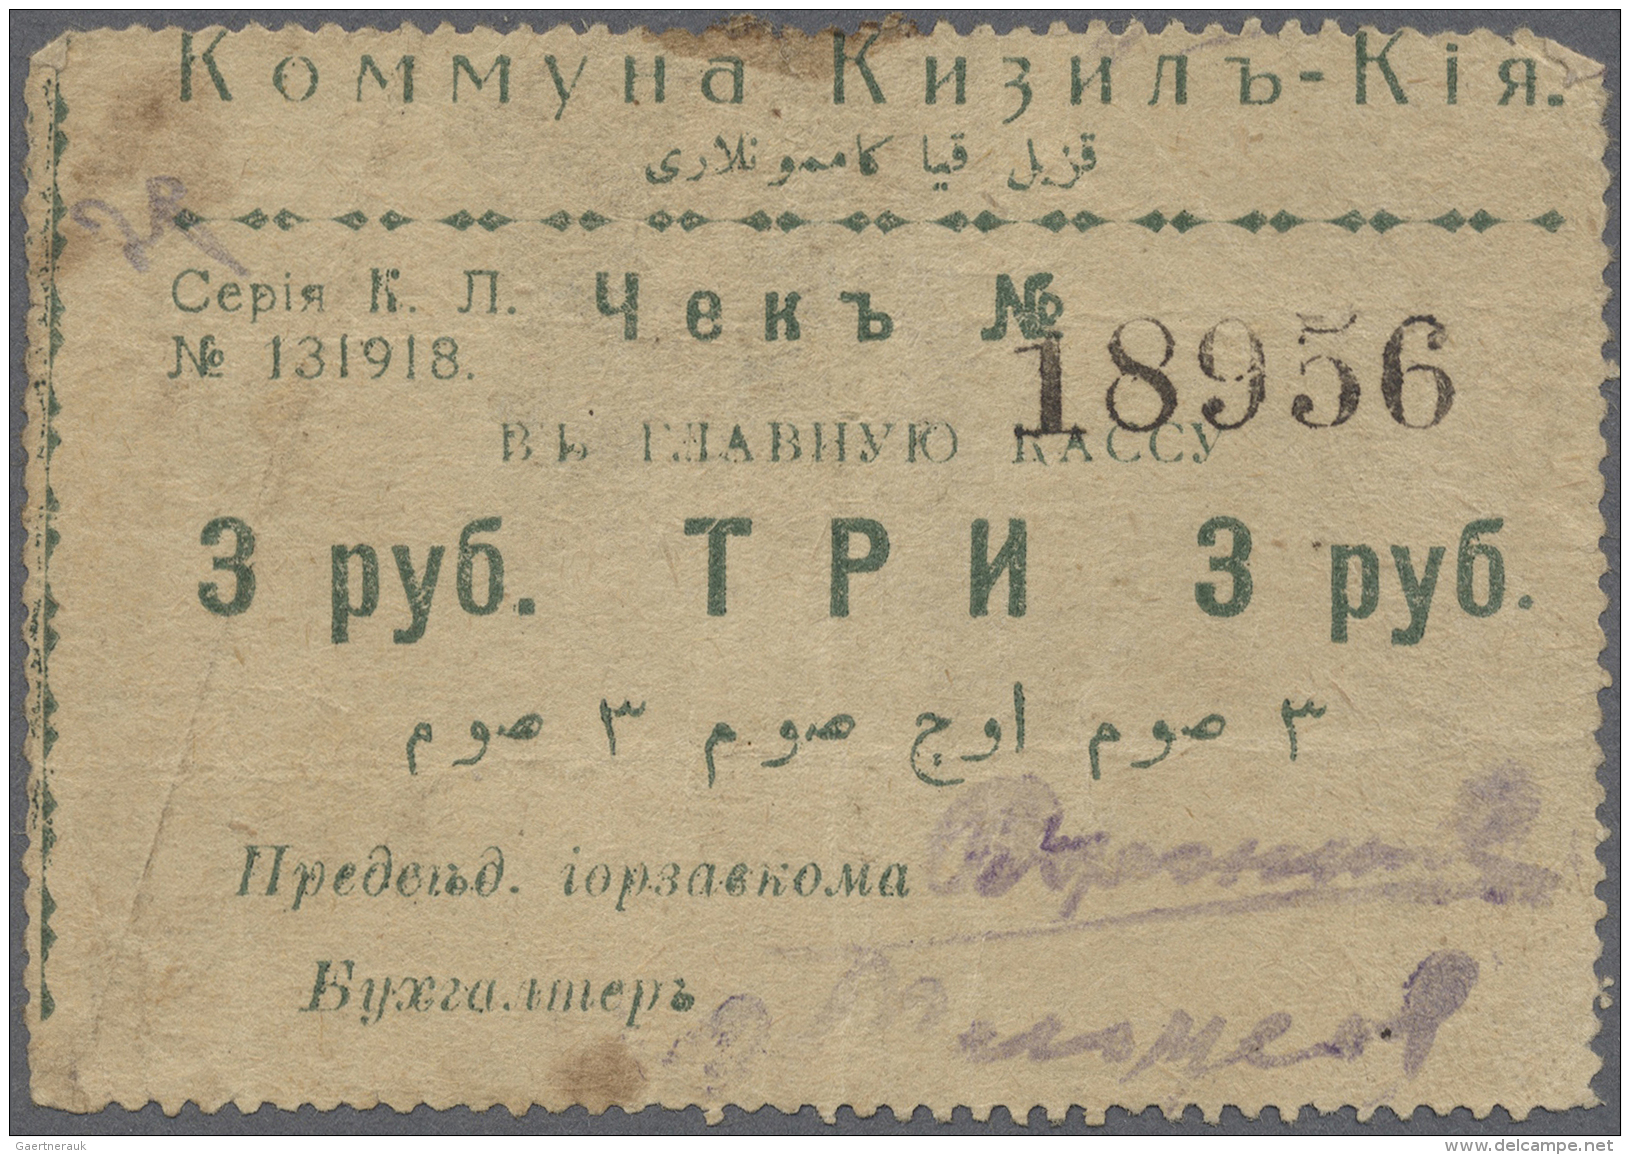 Kyrgyzstan / Kirgisistan: Commune Kyzyl-Kiya 3 Rubles 1918, P.NL In Used Condition With Several Folds And Stains, Taces - Kirghizistan